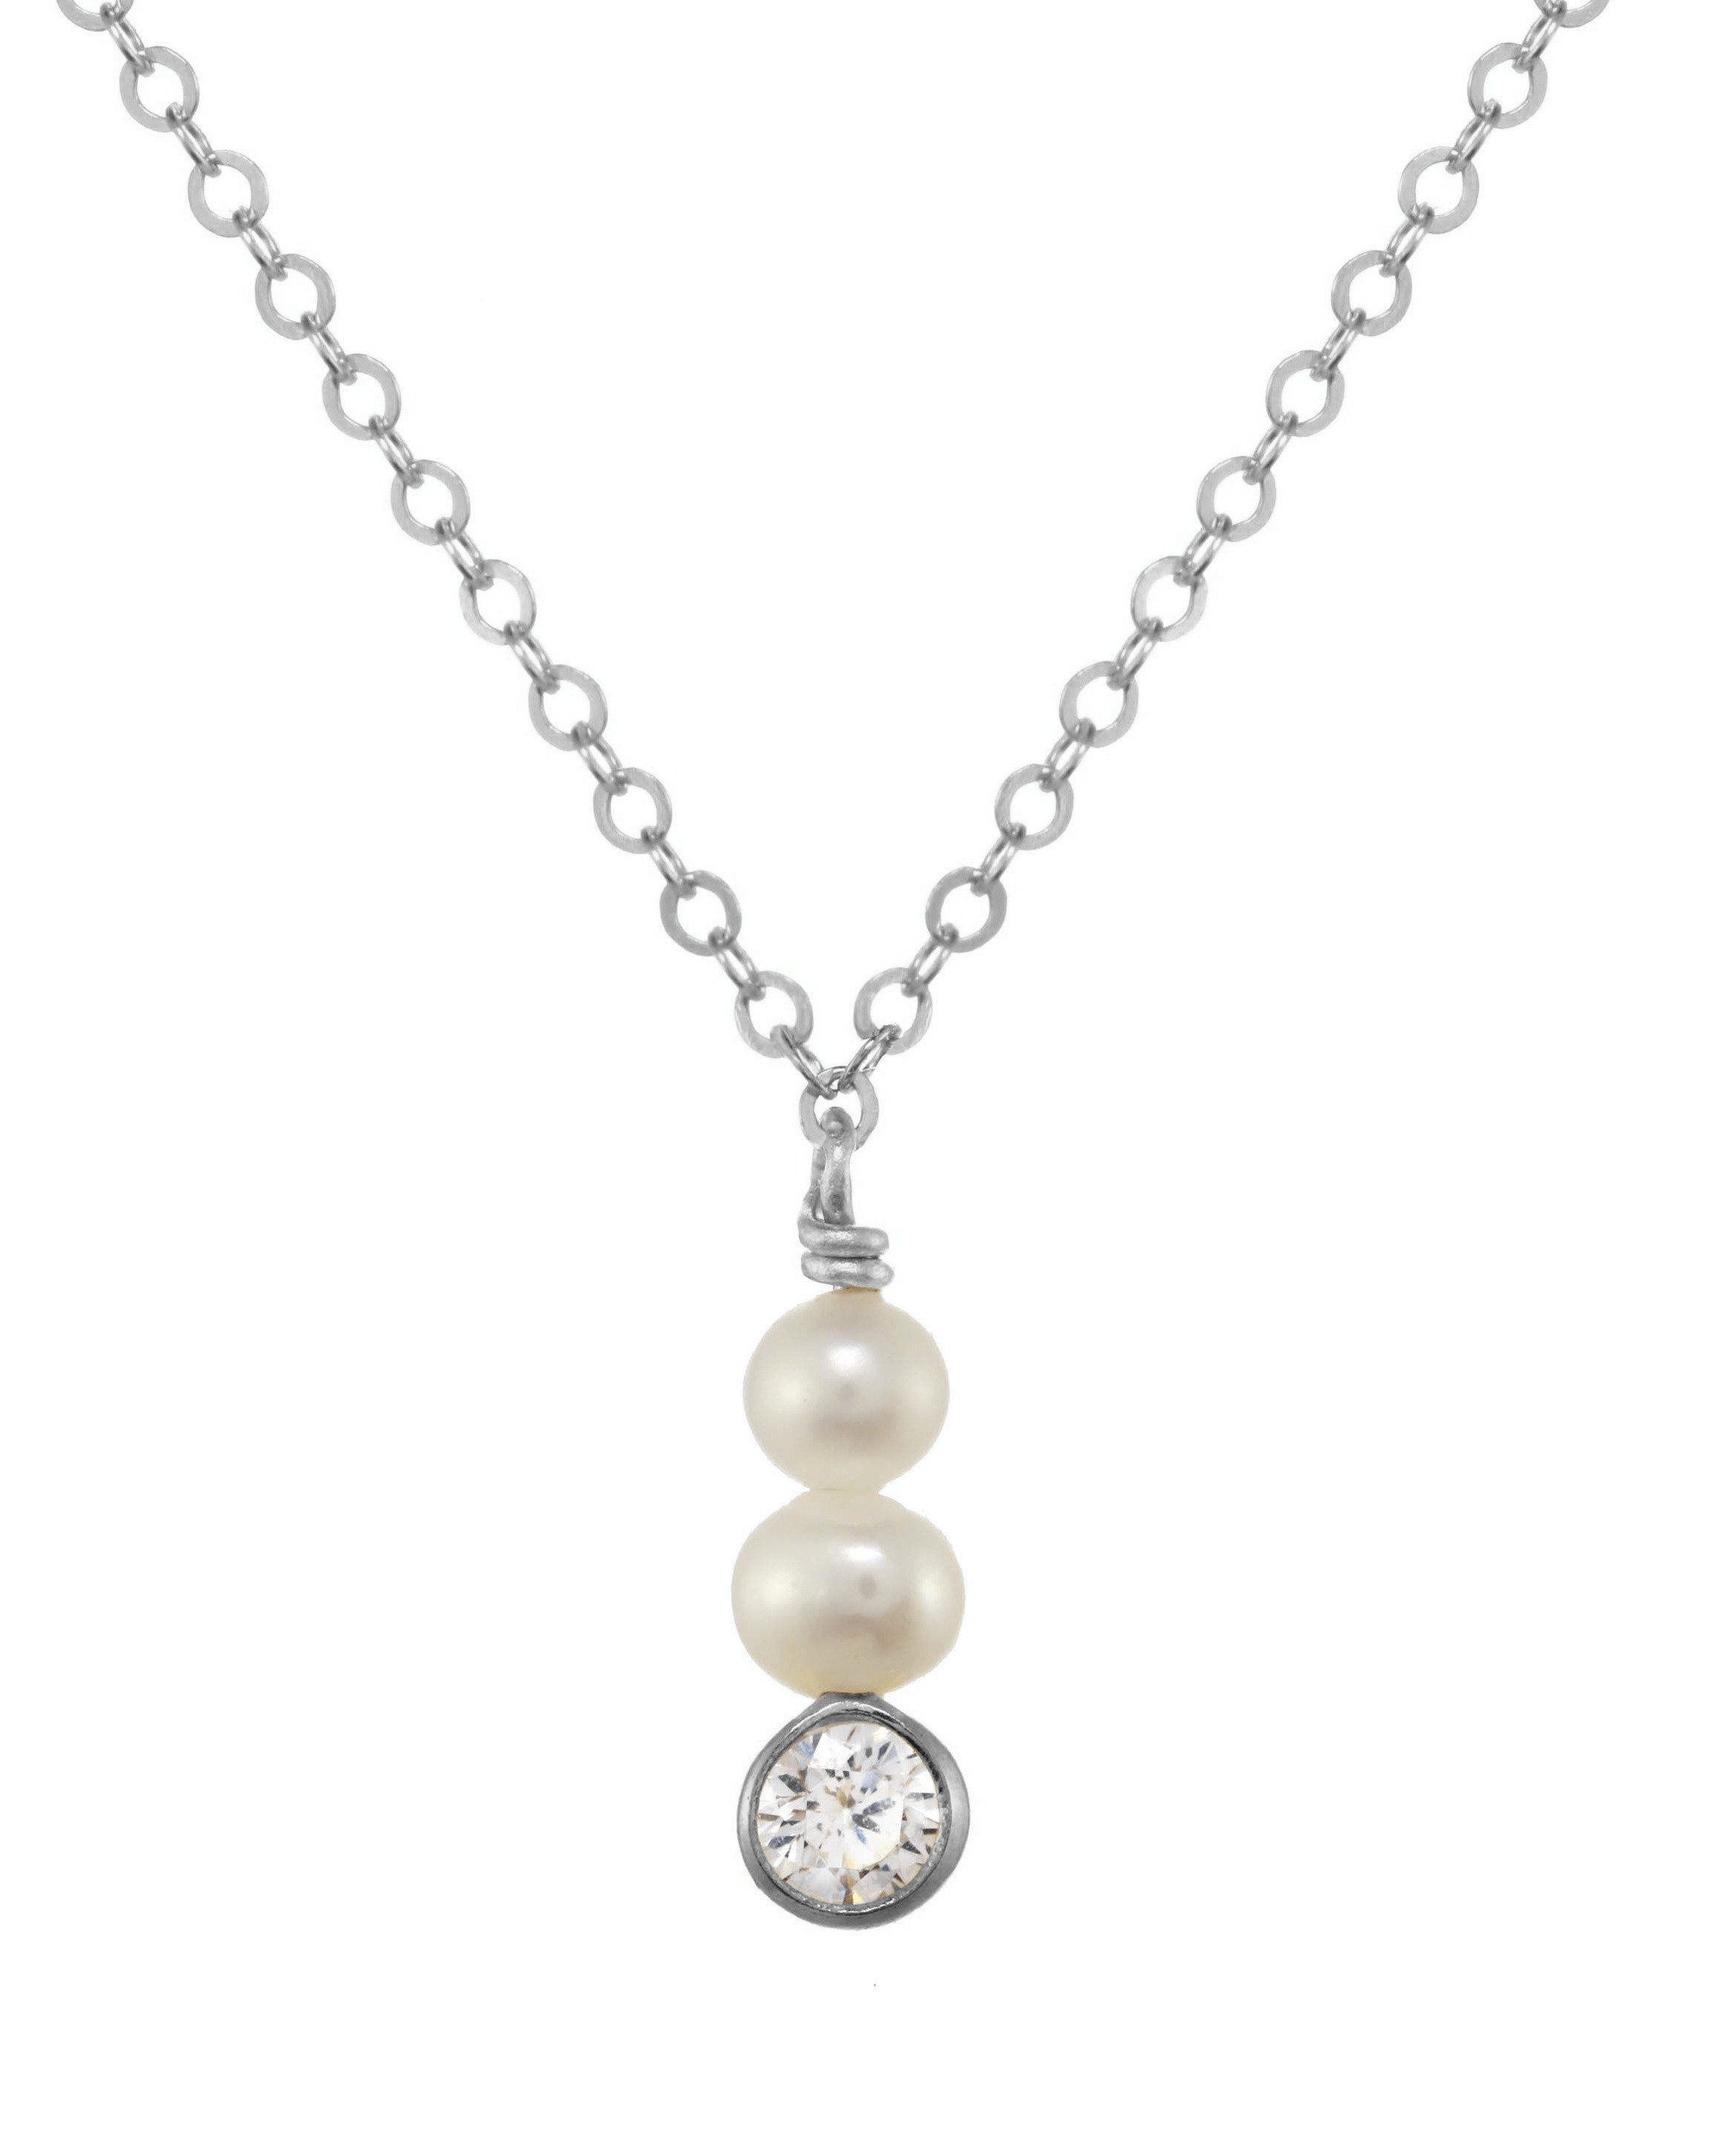 Coco Necklace by KOZAKH. A 16 to 18 inch adjustable length necklace in Sterling Silver, featuring 4mm to 5mm white round Pearls and a 3mm Cubic Zirconia bezel.